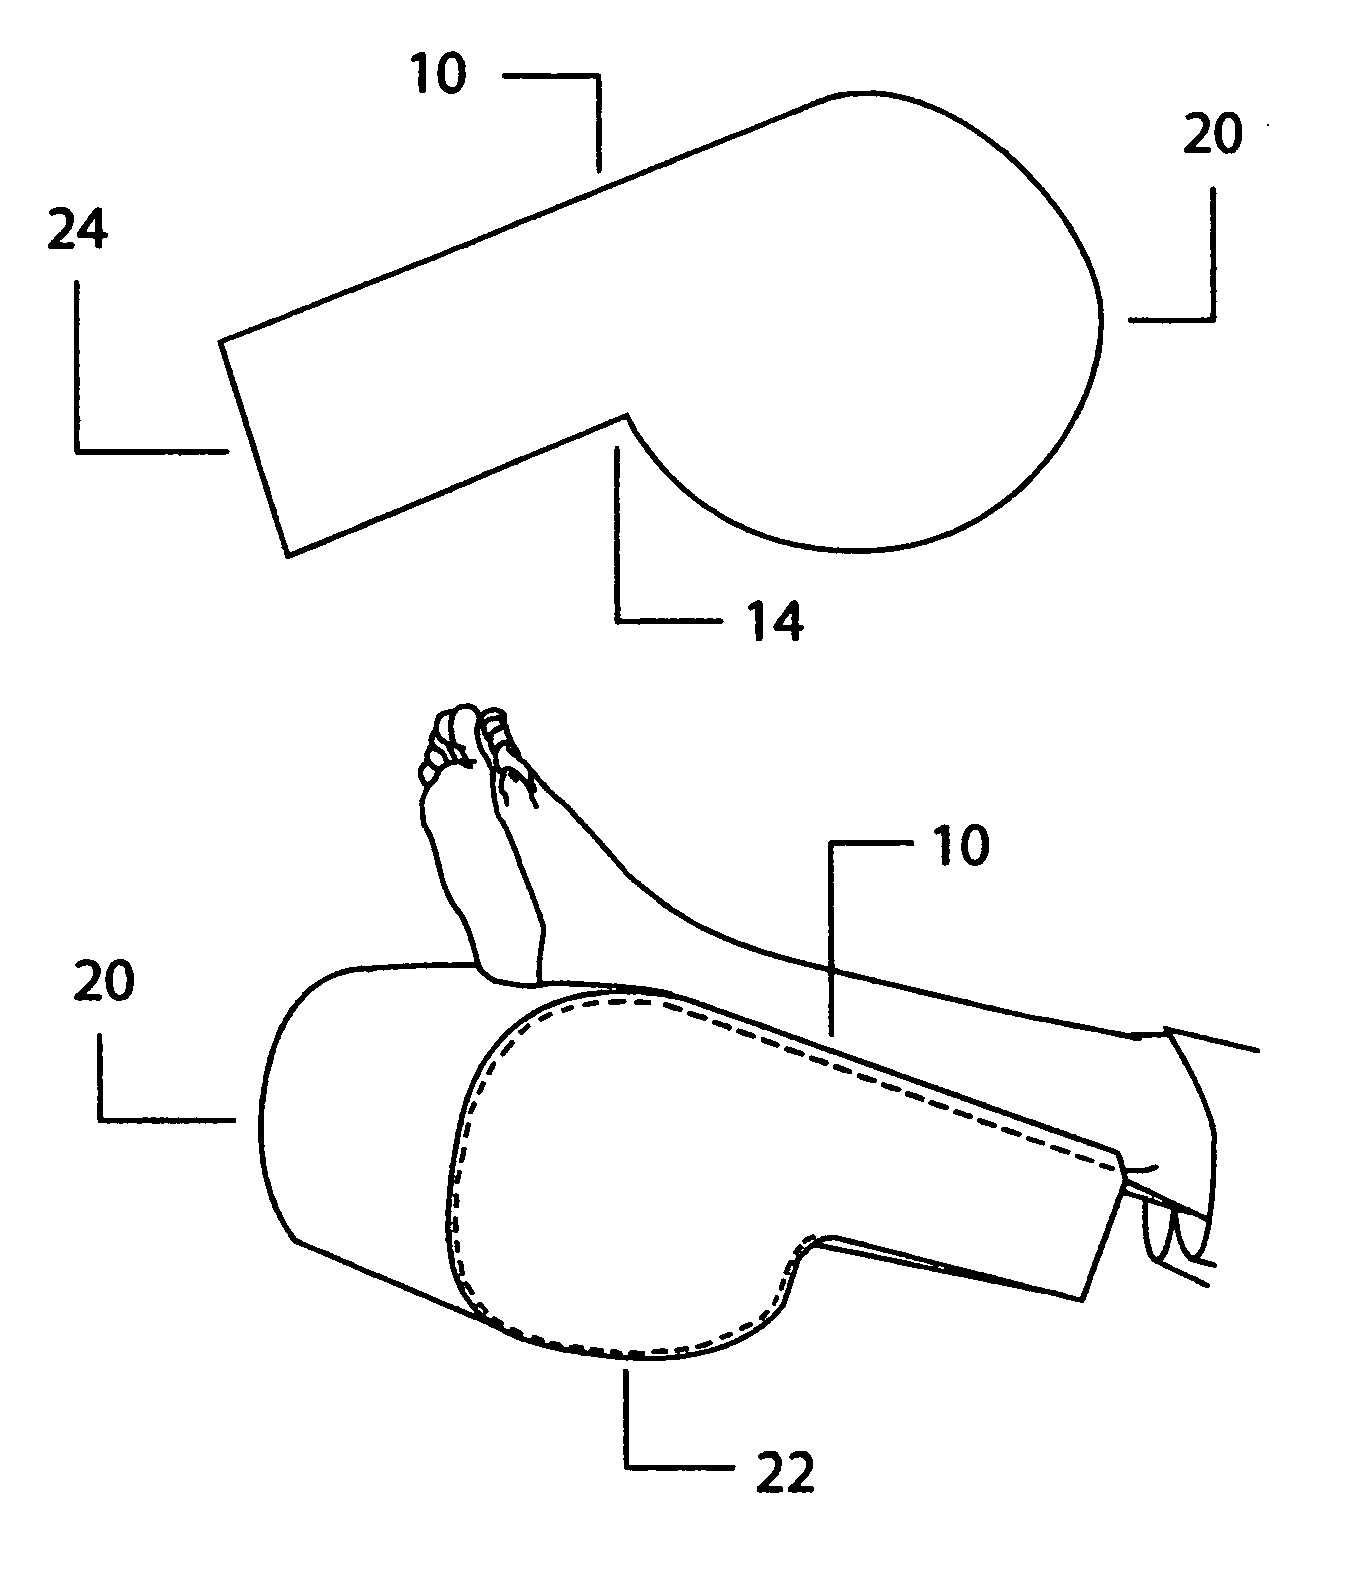 Lower leg and foot pillow